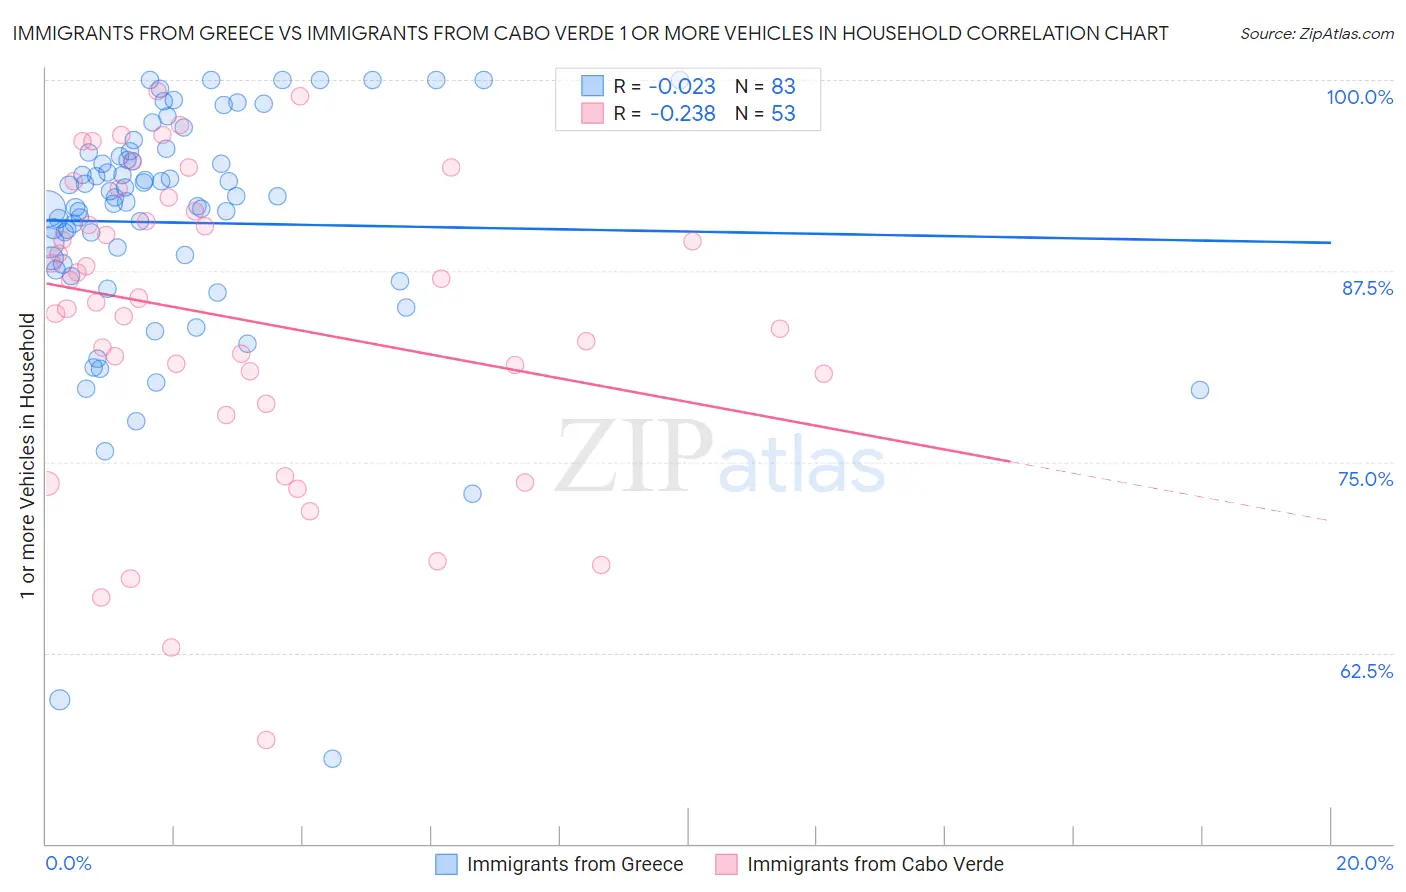 Immigrants from Greece vs Immigrants from Cabo Verde 1 or more Vehicles in Household